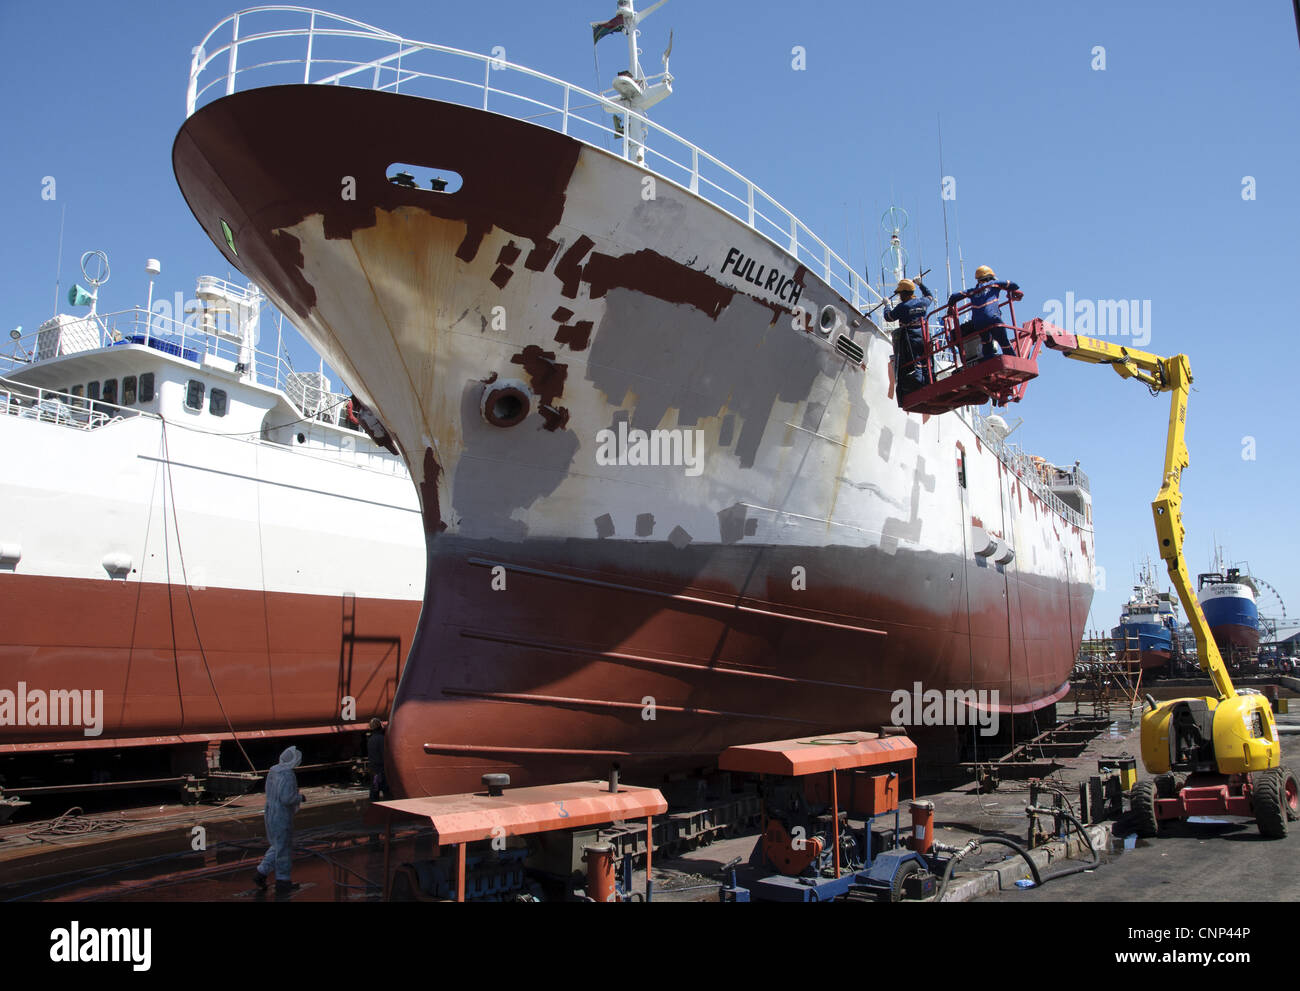 Cargo ship being repainted in dry dock, Cape Town, Western Cape, South Africa Stock Photo